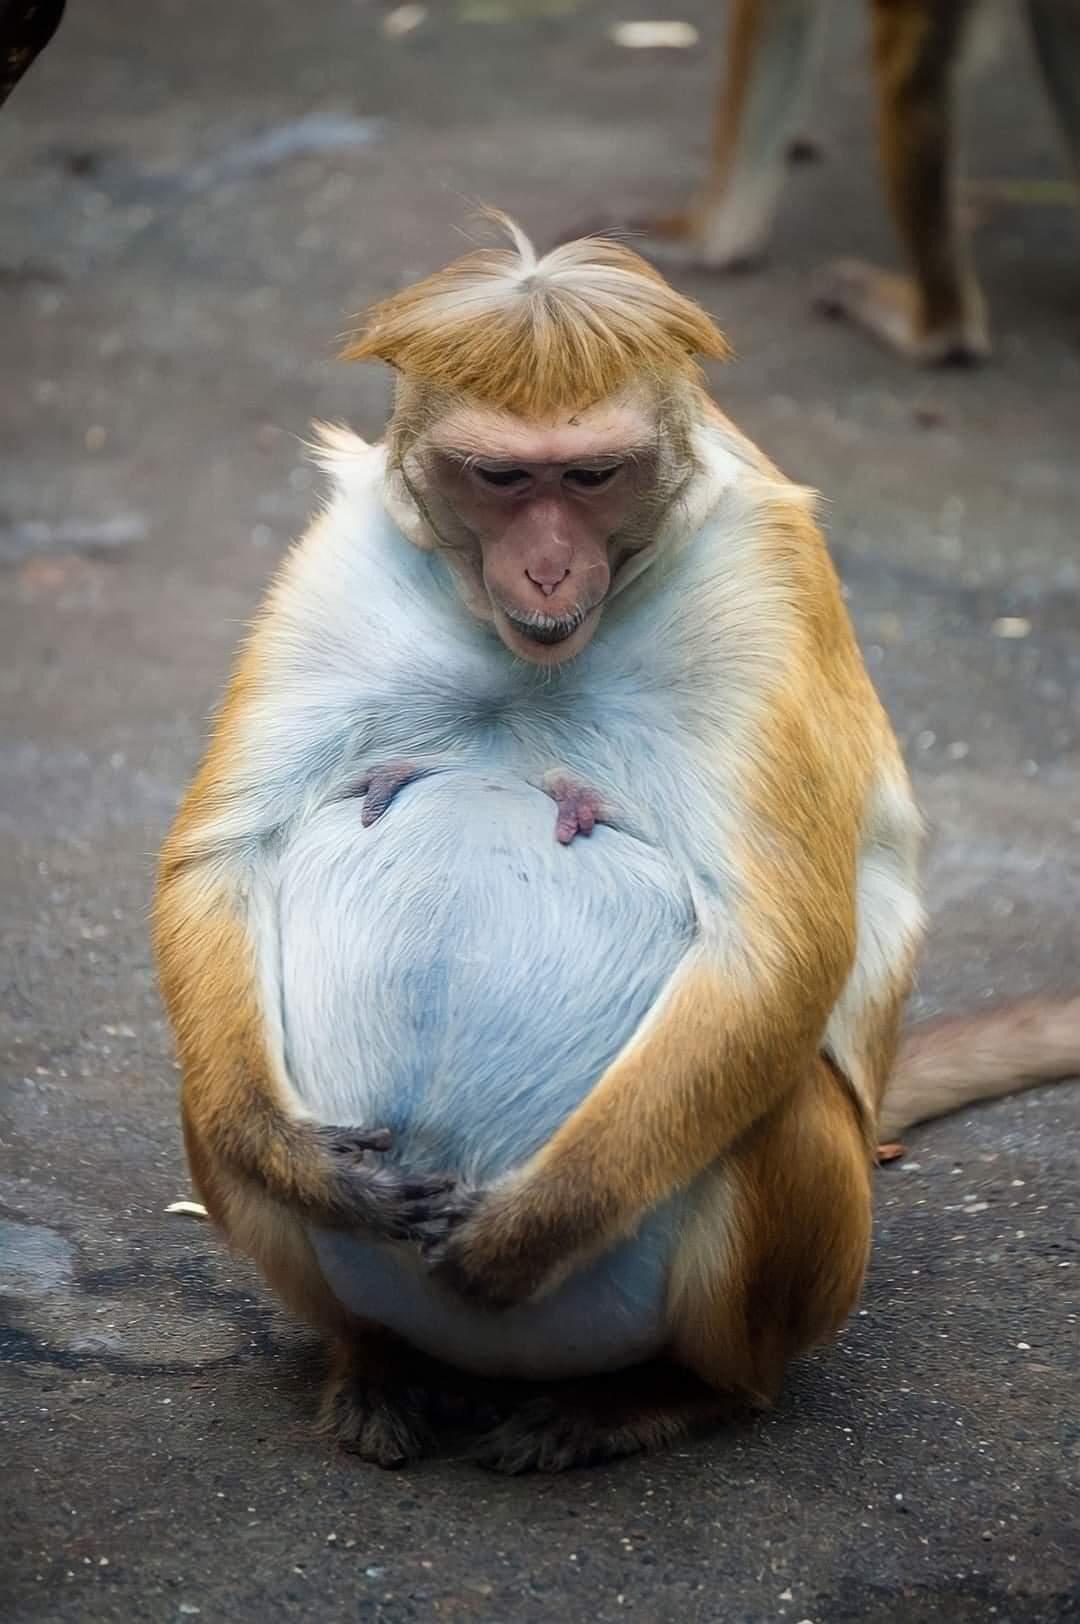 Pregnant monkey holds her very round belly with her hands.